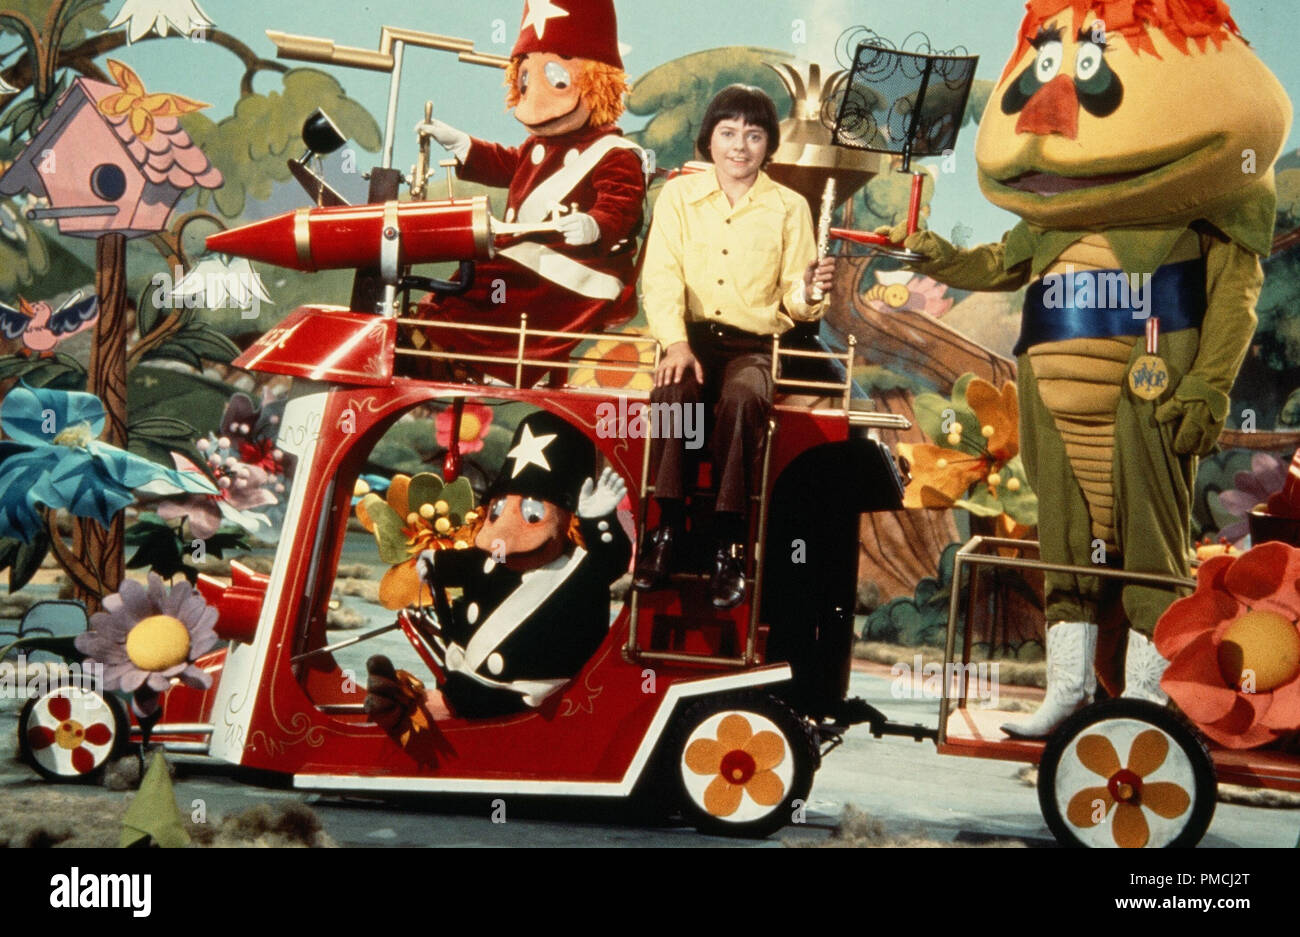 Jack Wild,  'H.R. Pufnstuf' (circa 1970)   File Reference # 33650 188THA  For Editorial Use Only -  All Rights Reserved Stock Photo